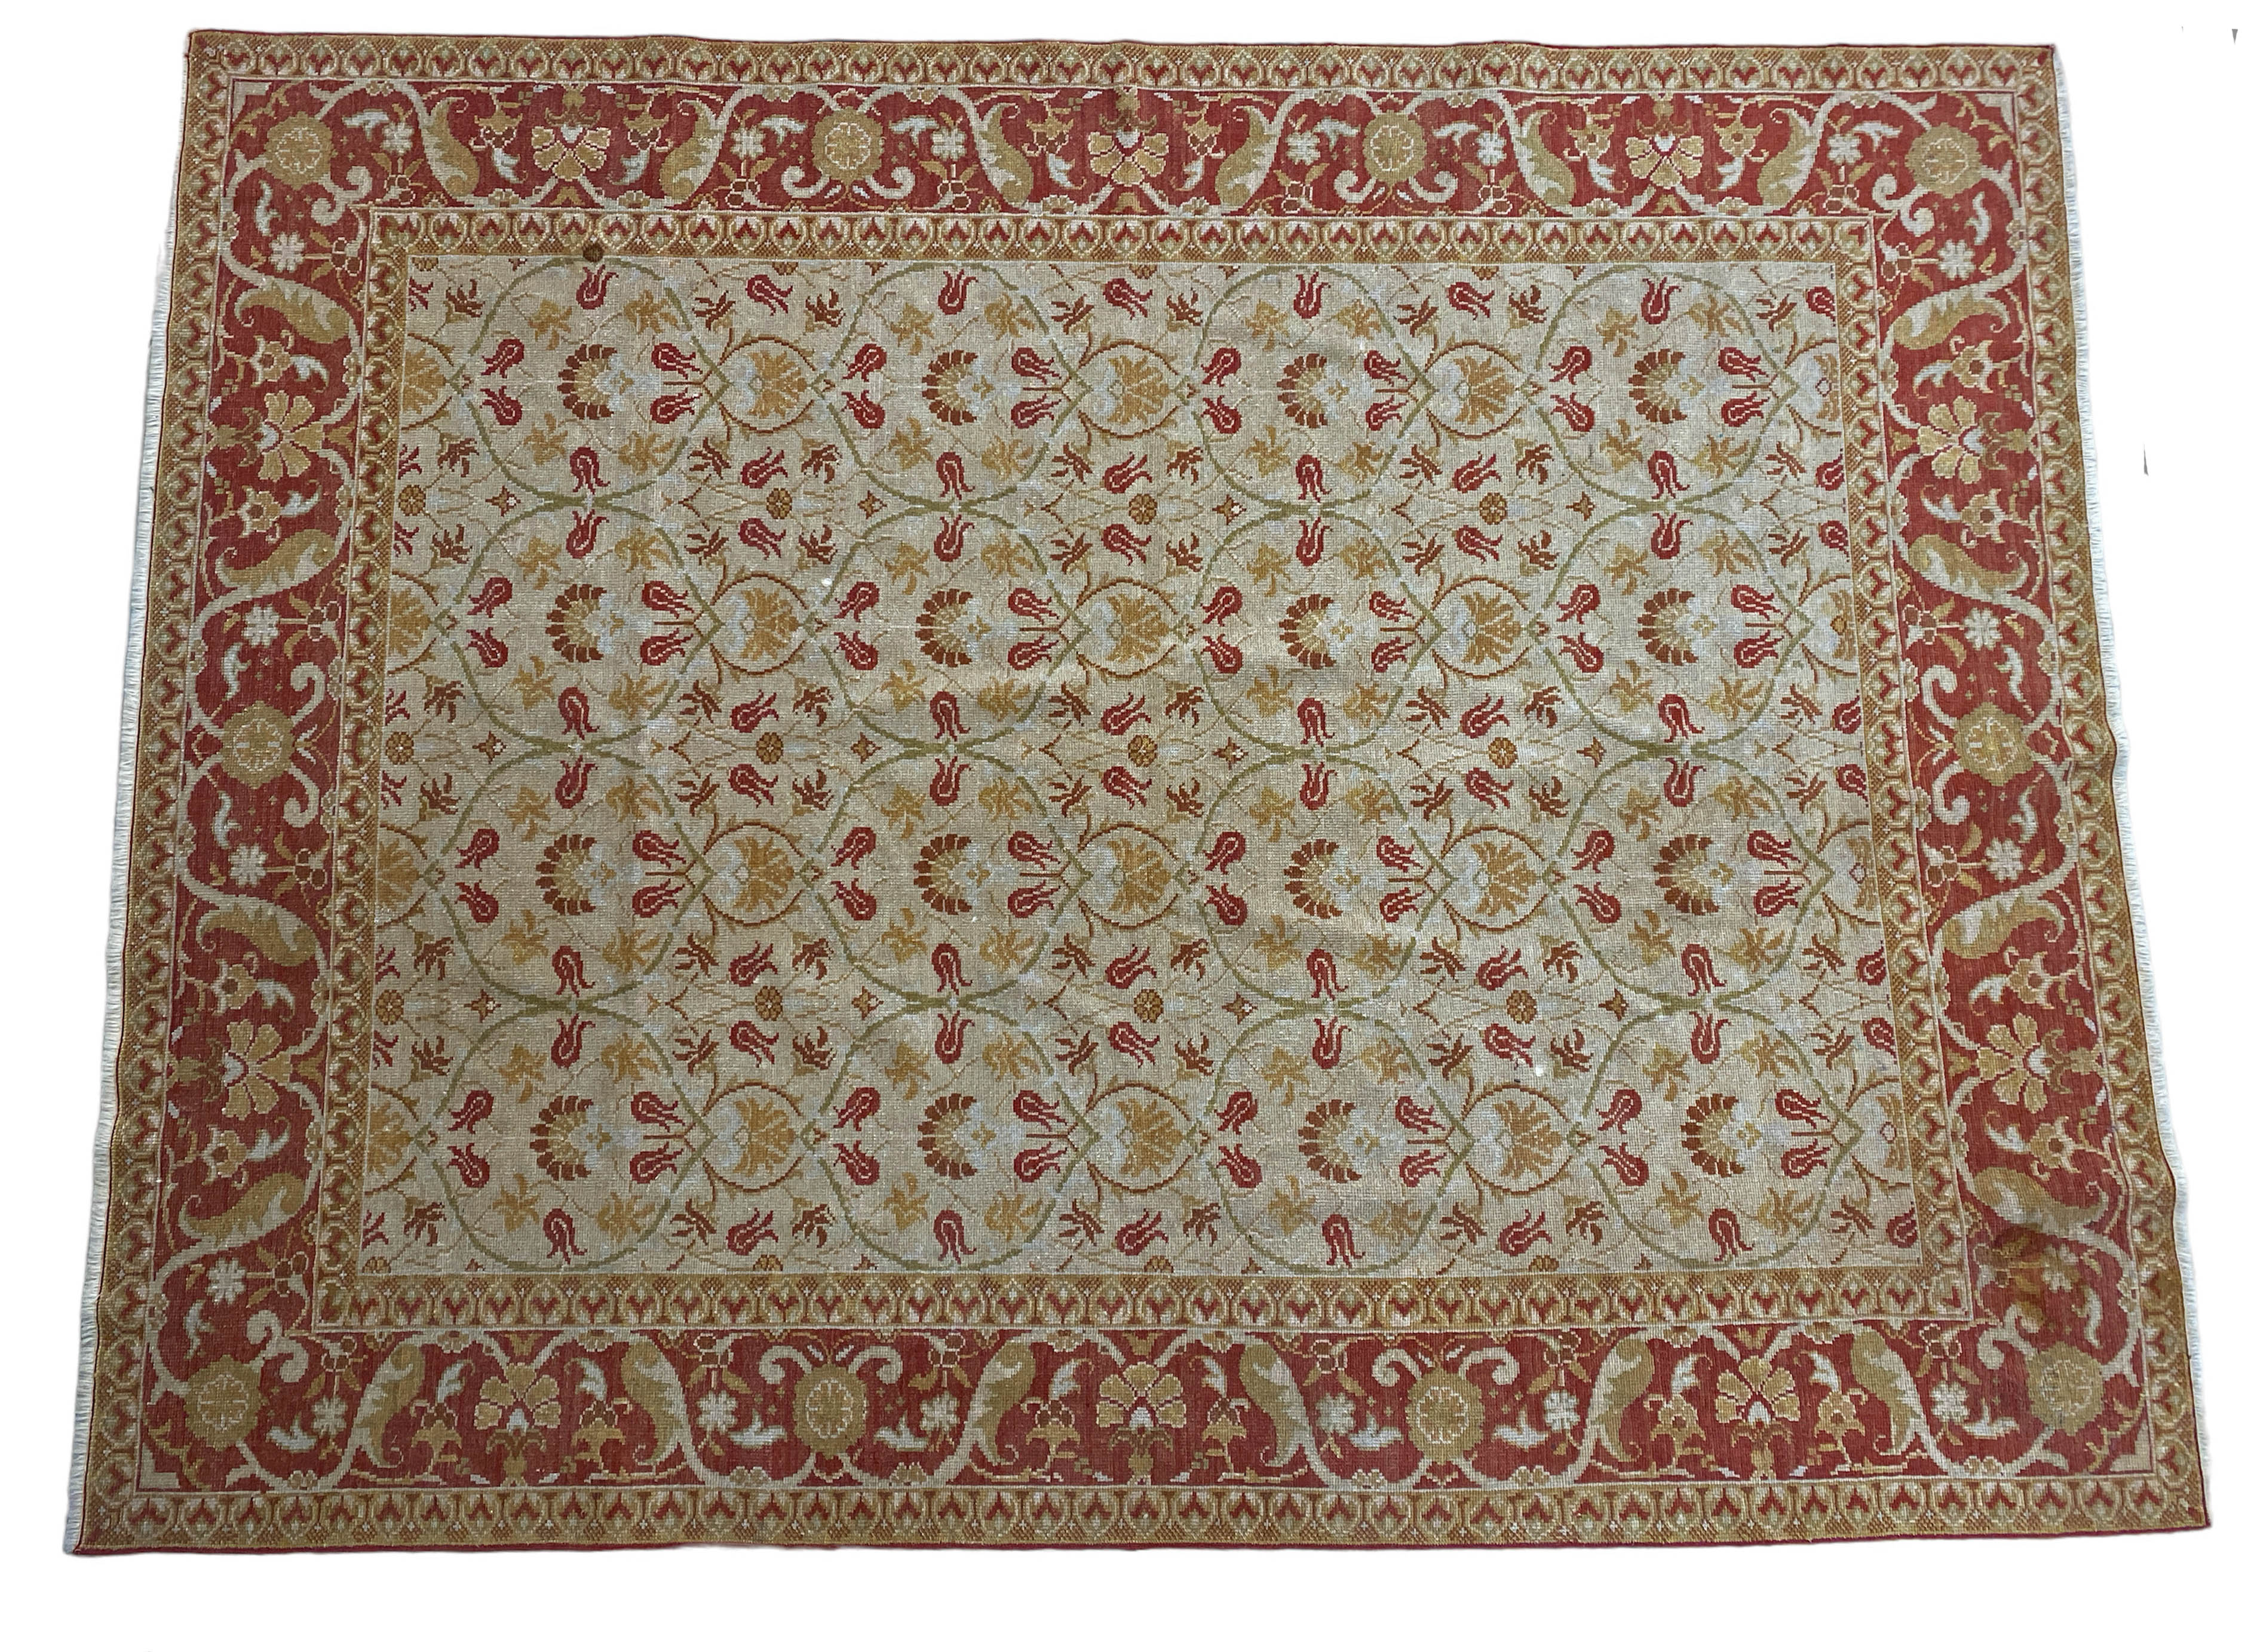 An Oriental Carpet, Probably Turkish the ivory oval lattice field with an all over design of flowing